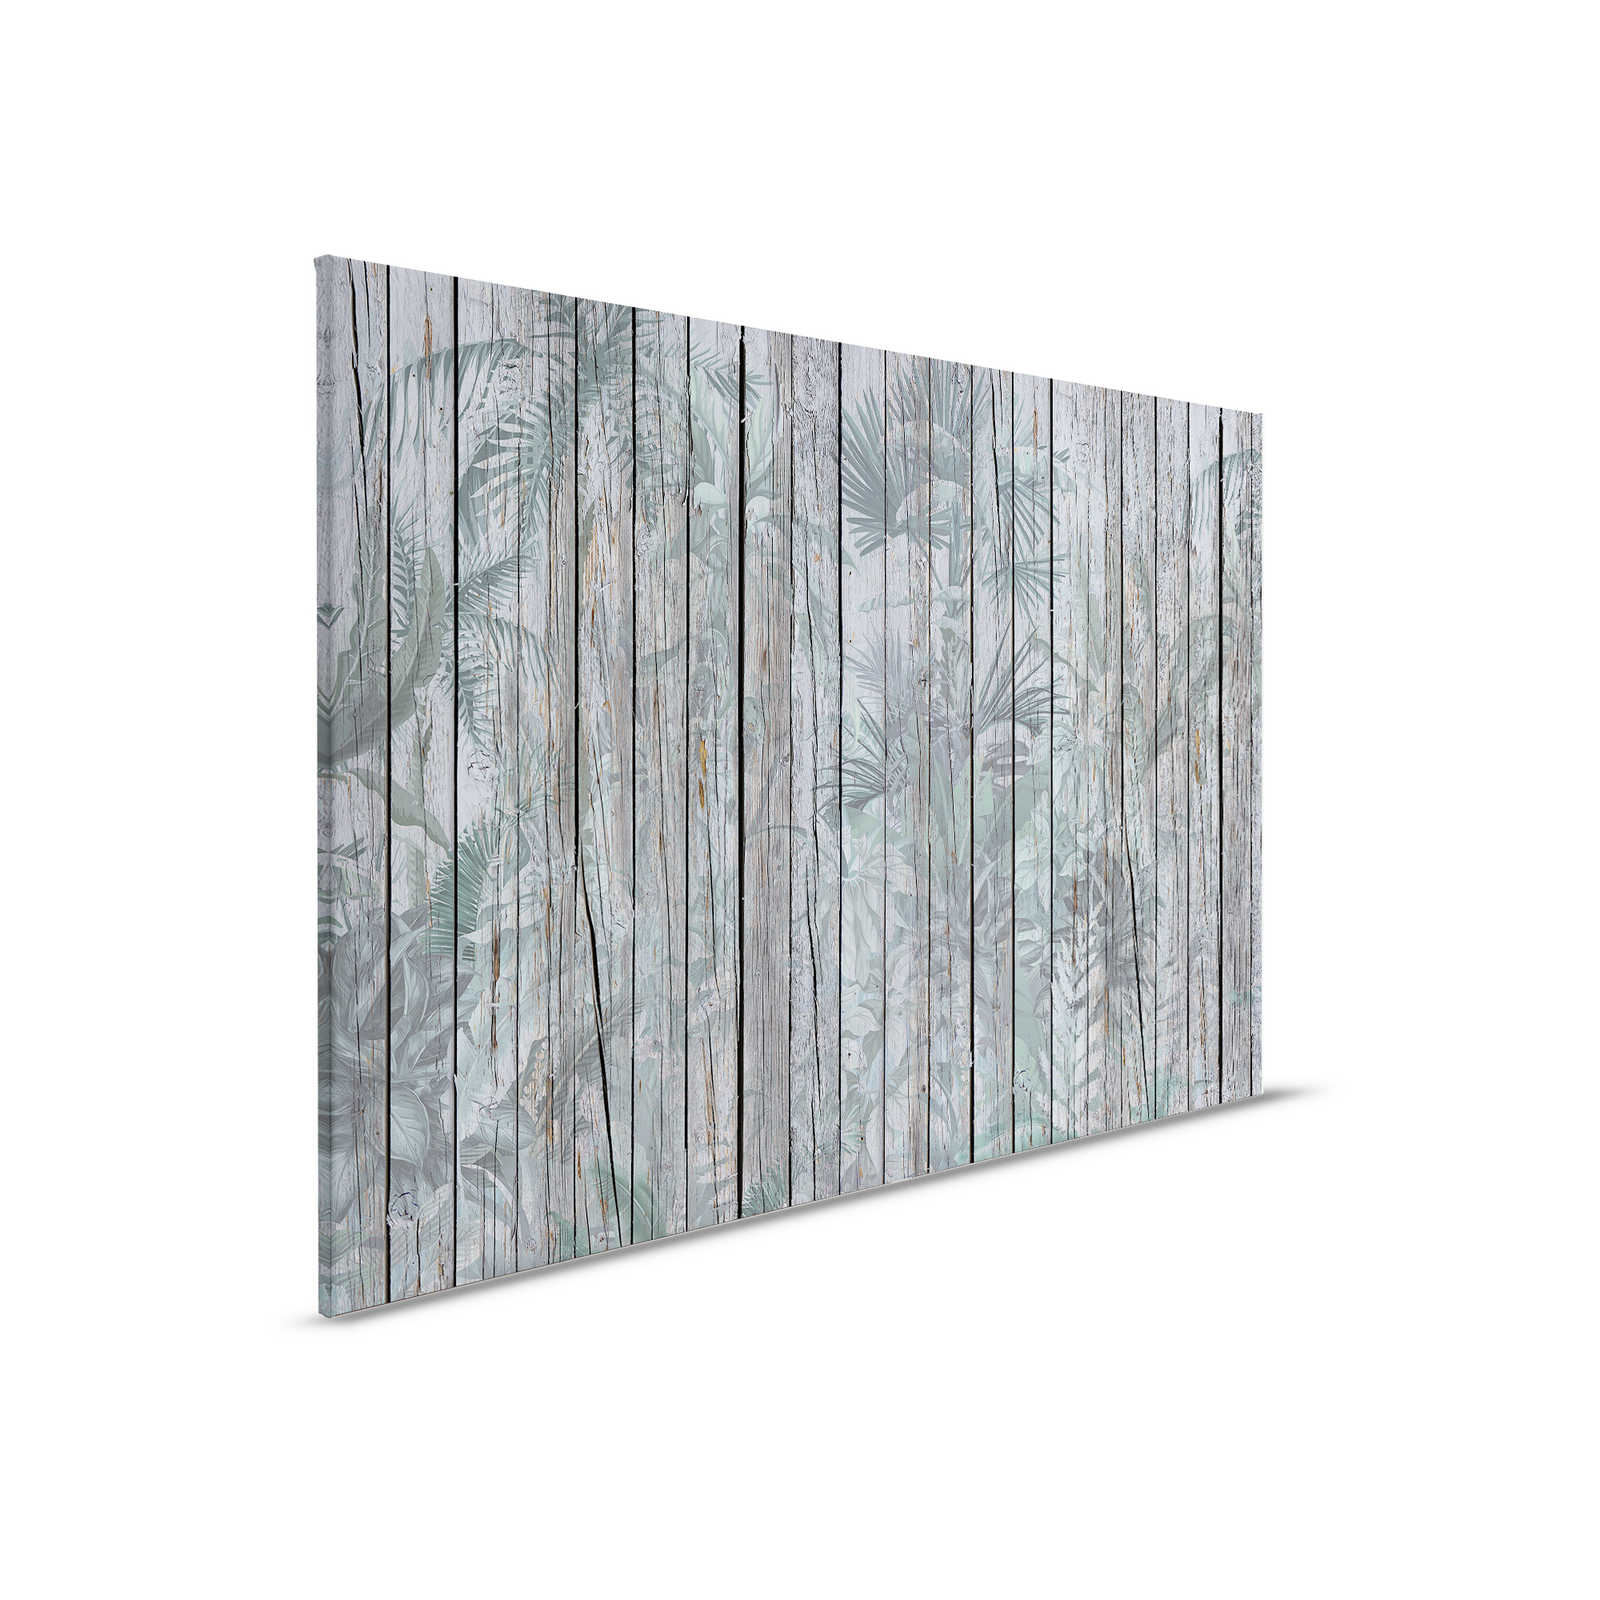 Canvas painting Wooden wall with jungle plants - 0,90 m x 0,60 m
